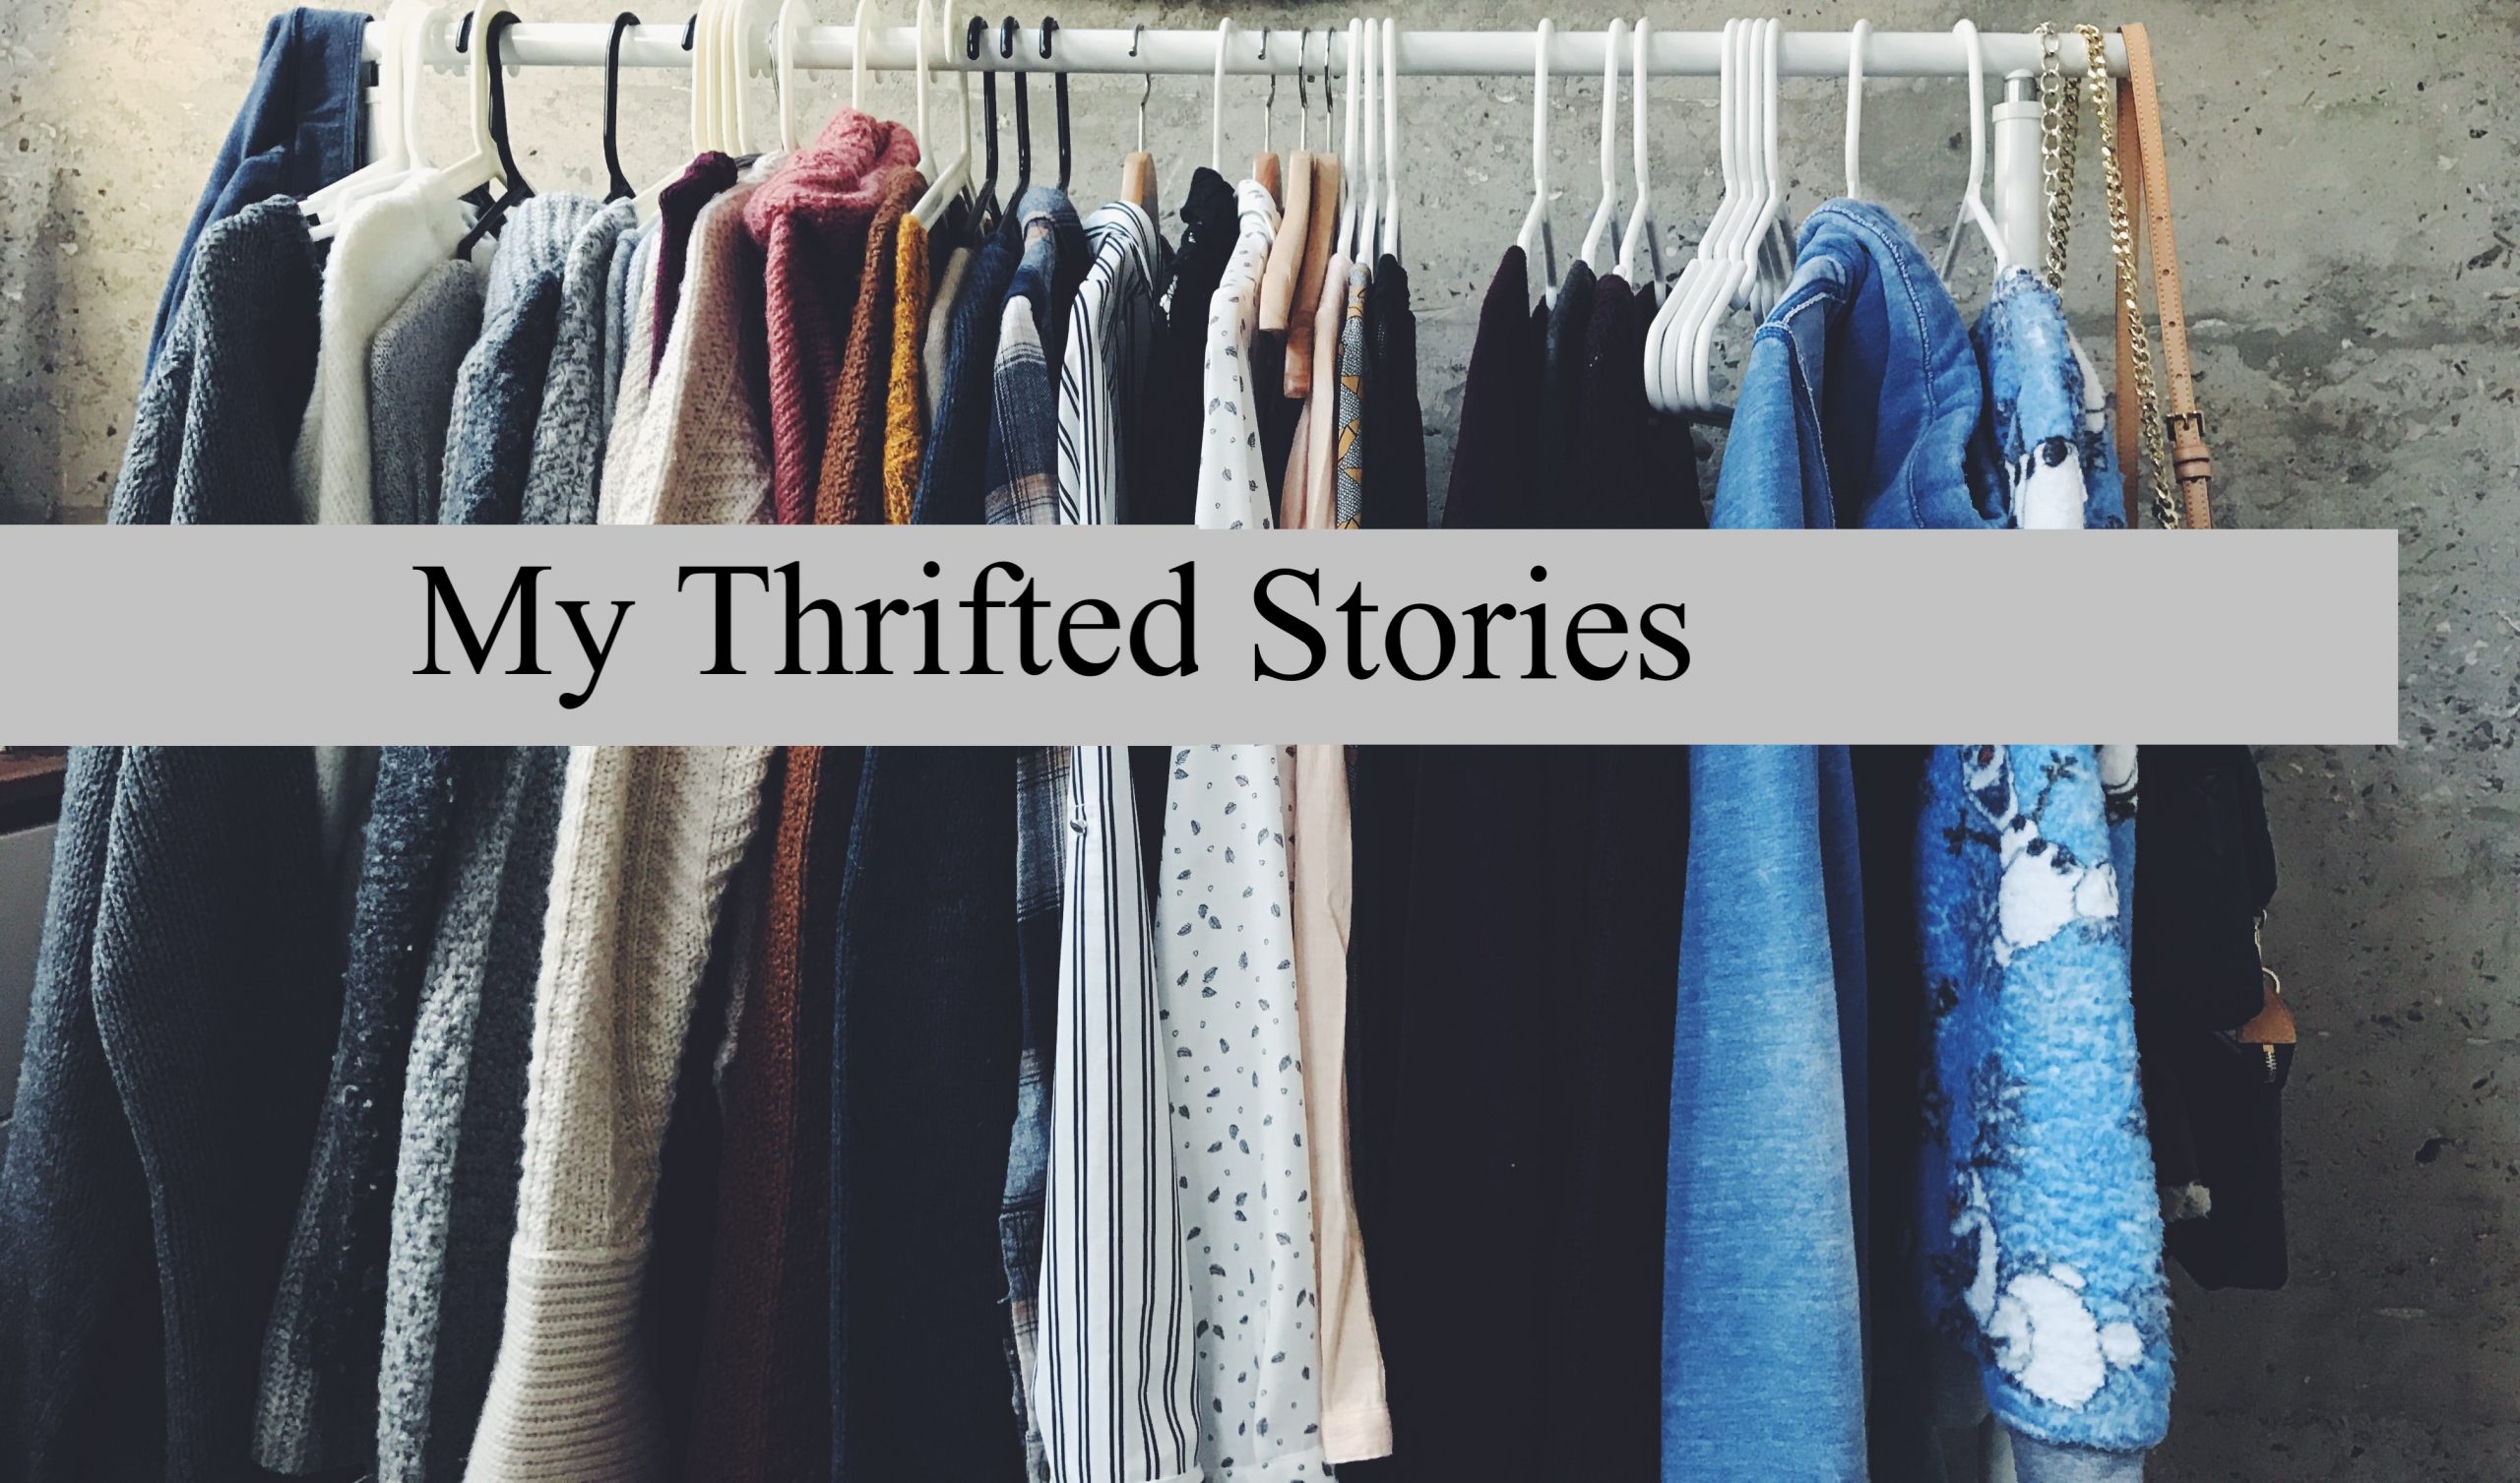 My thrifted stories